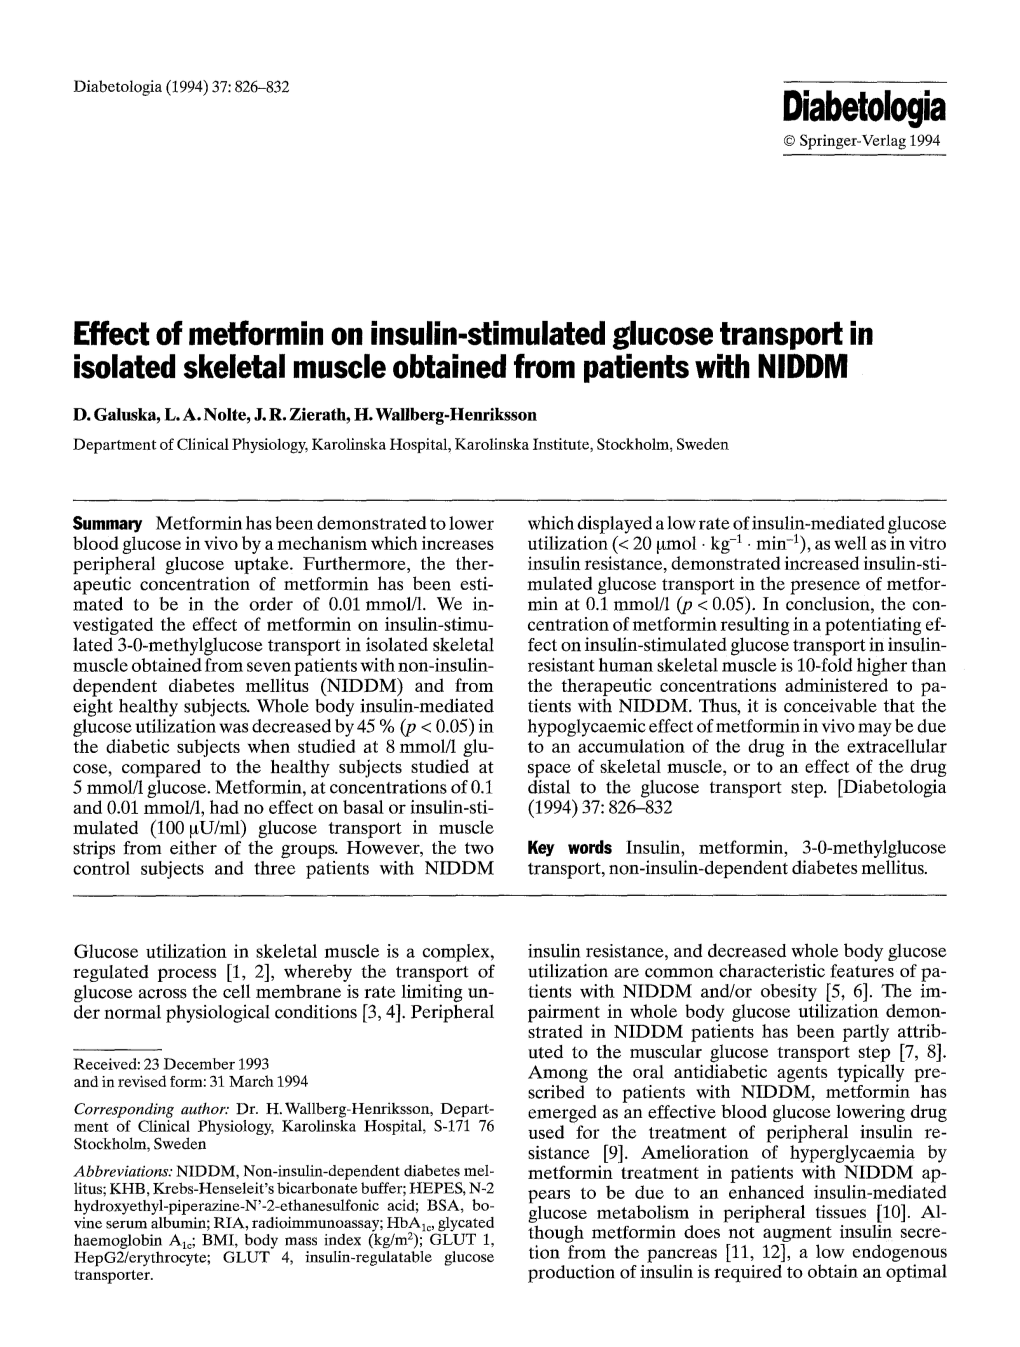 Effect of Metformin on Insulin-Stimulated Glucose Transport in Isolated Skeletal Muscle Obtained from Patients with NIDDM